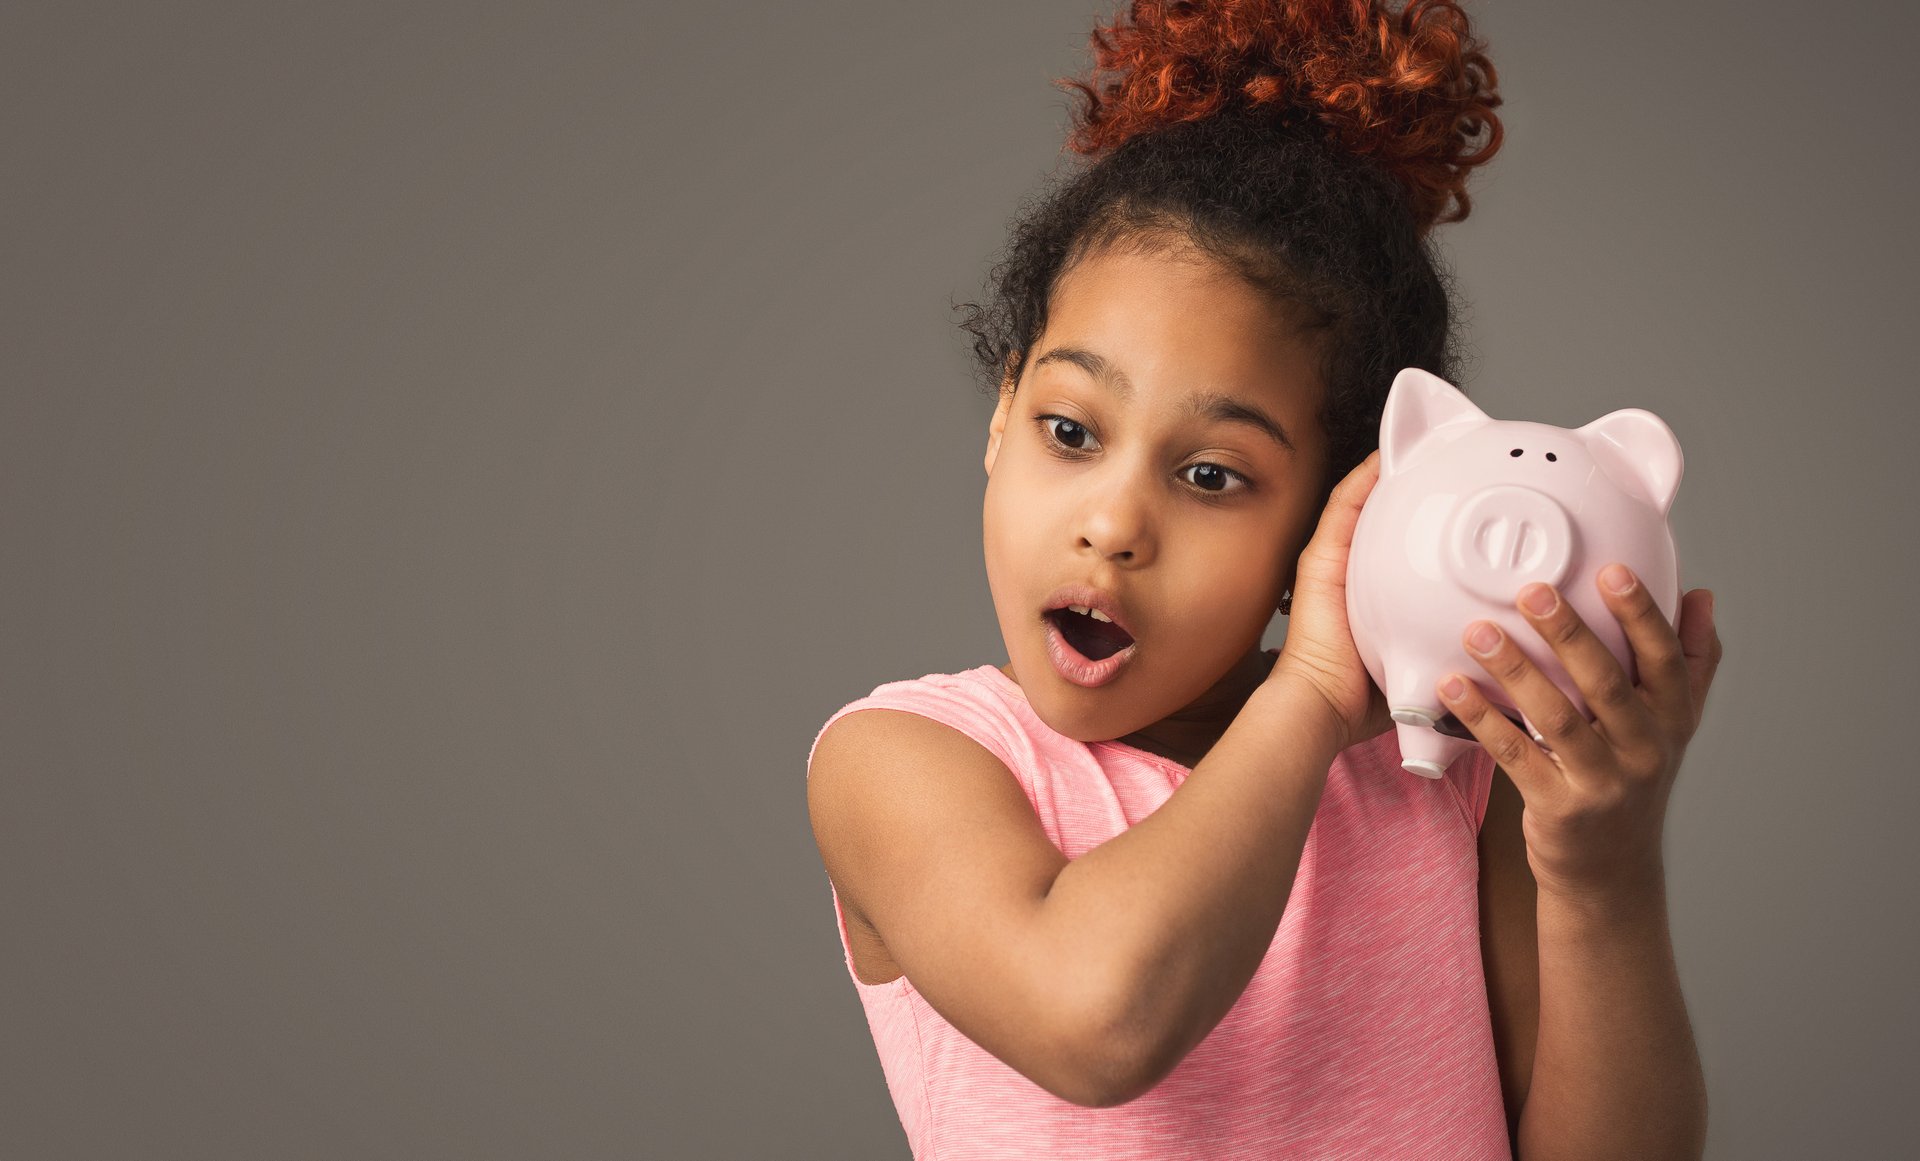 A little girl holds a piggy bank up to her ear